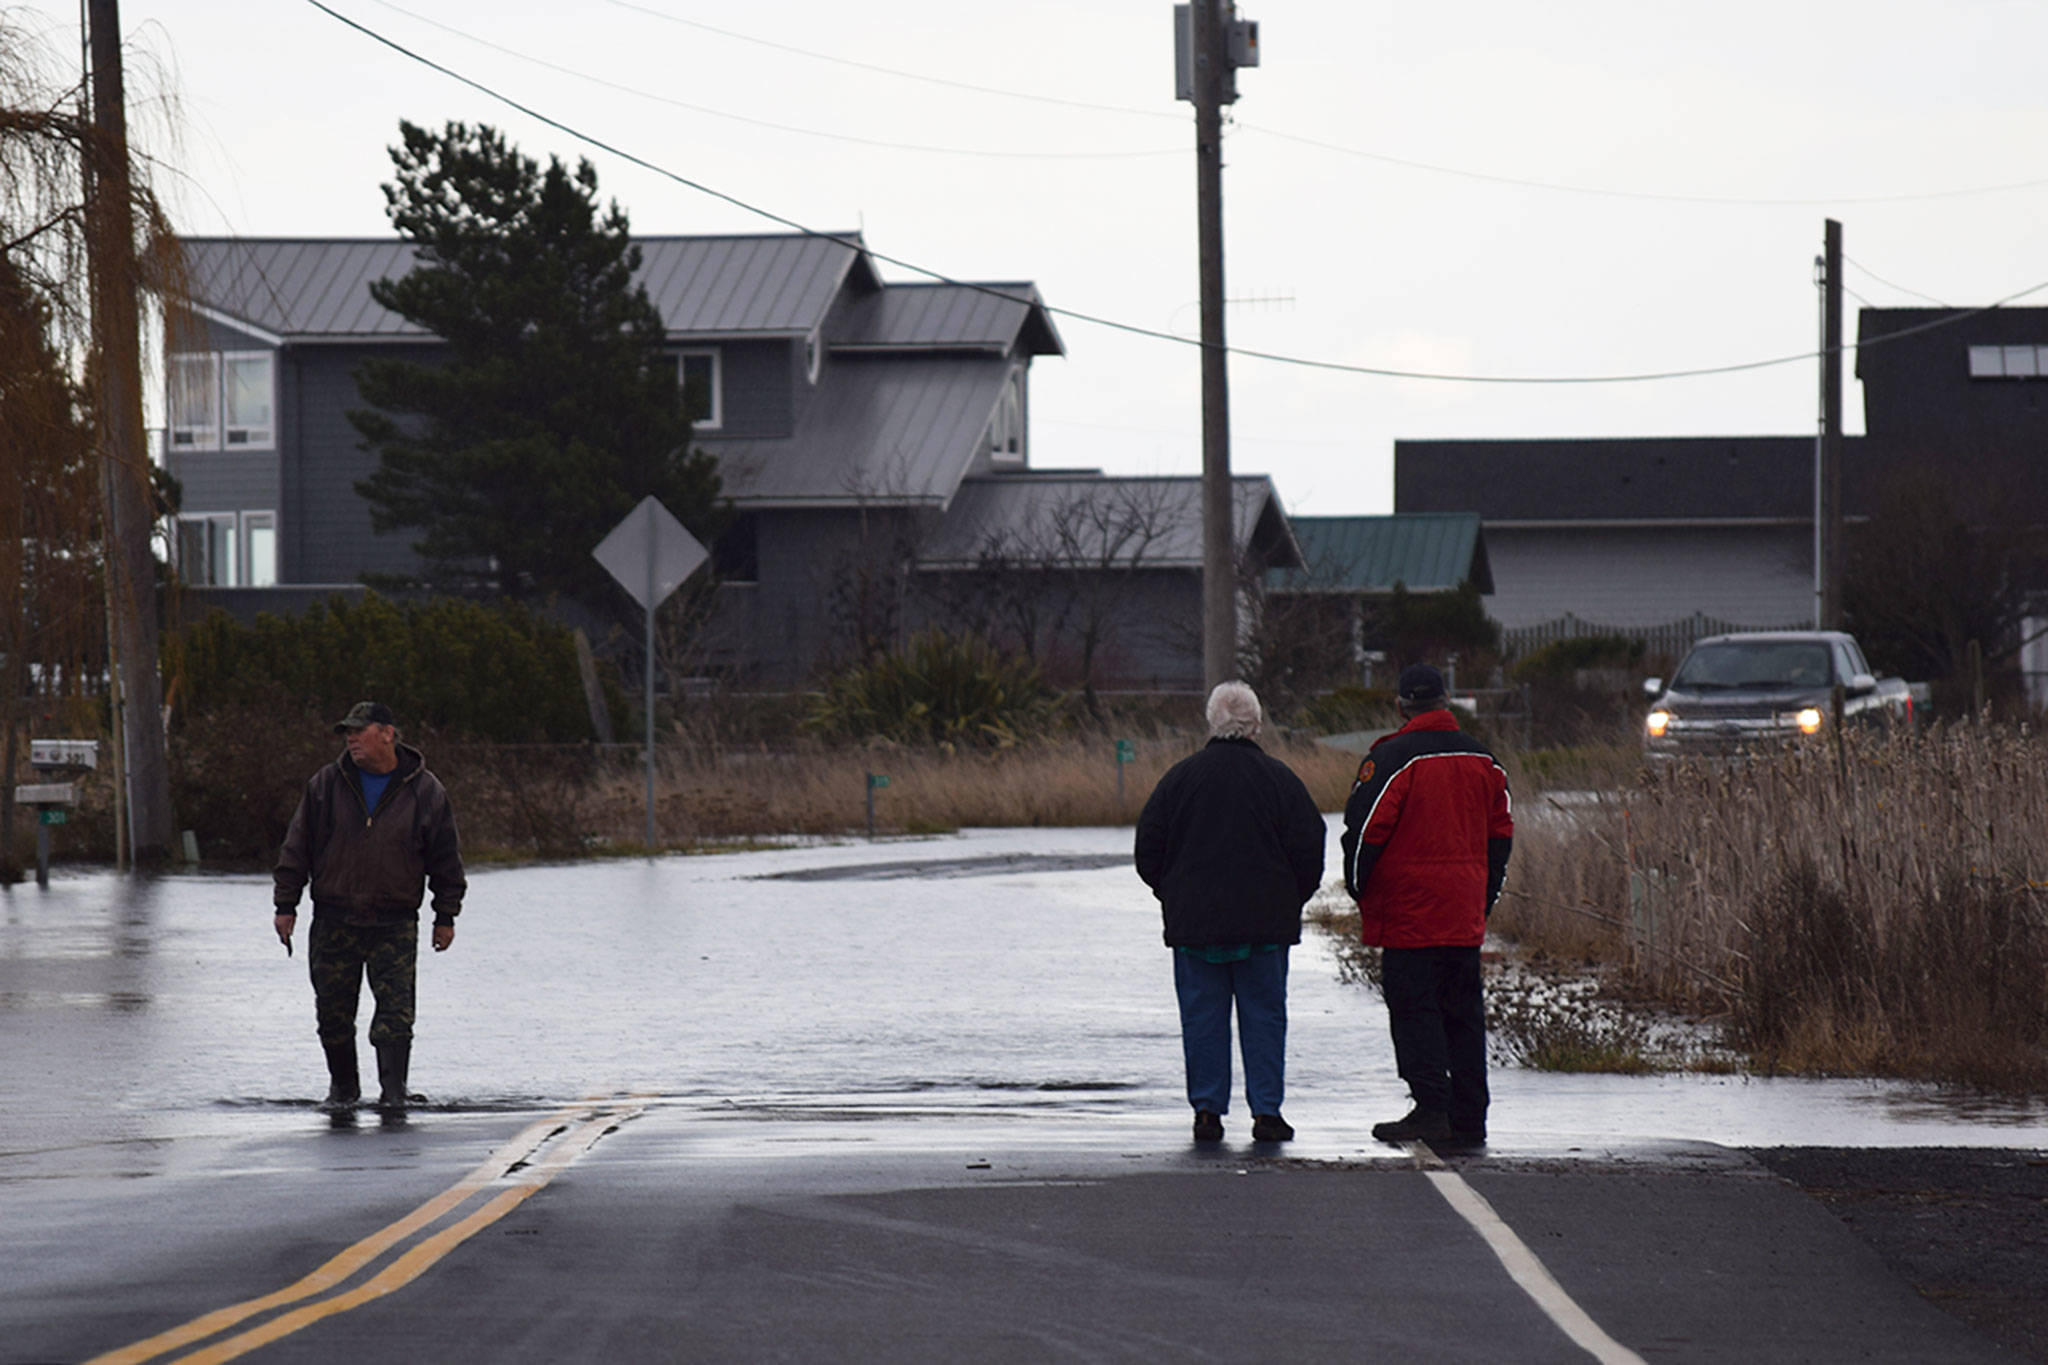 Dwayne Pettett, a nearby resident of 3 Crabs Road, left, wades through about 1 foot deep of water on 3 Crabs Road after high tides and storm surge caused water to flood parts of the area around noon on Dec. 20. Sequim Gazette photo by Erin Hawkins